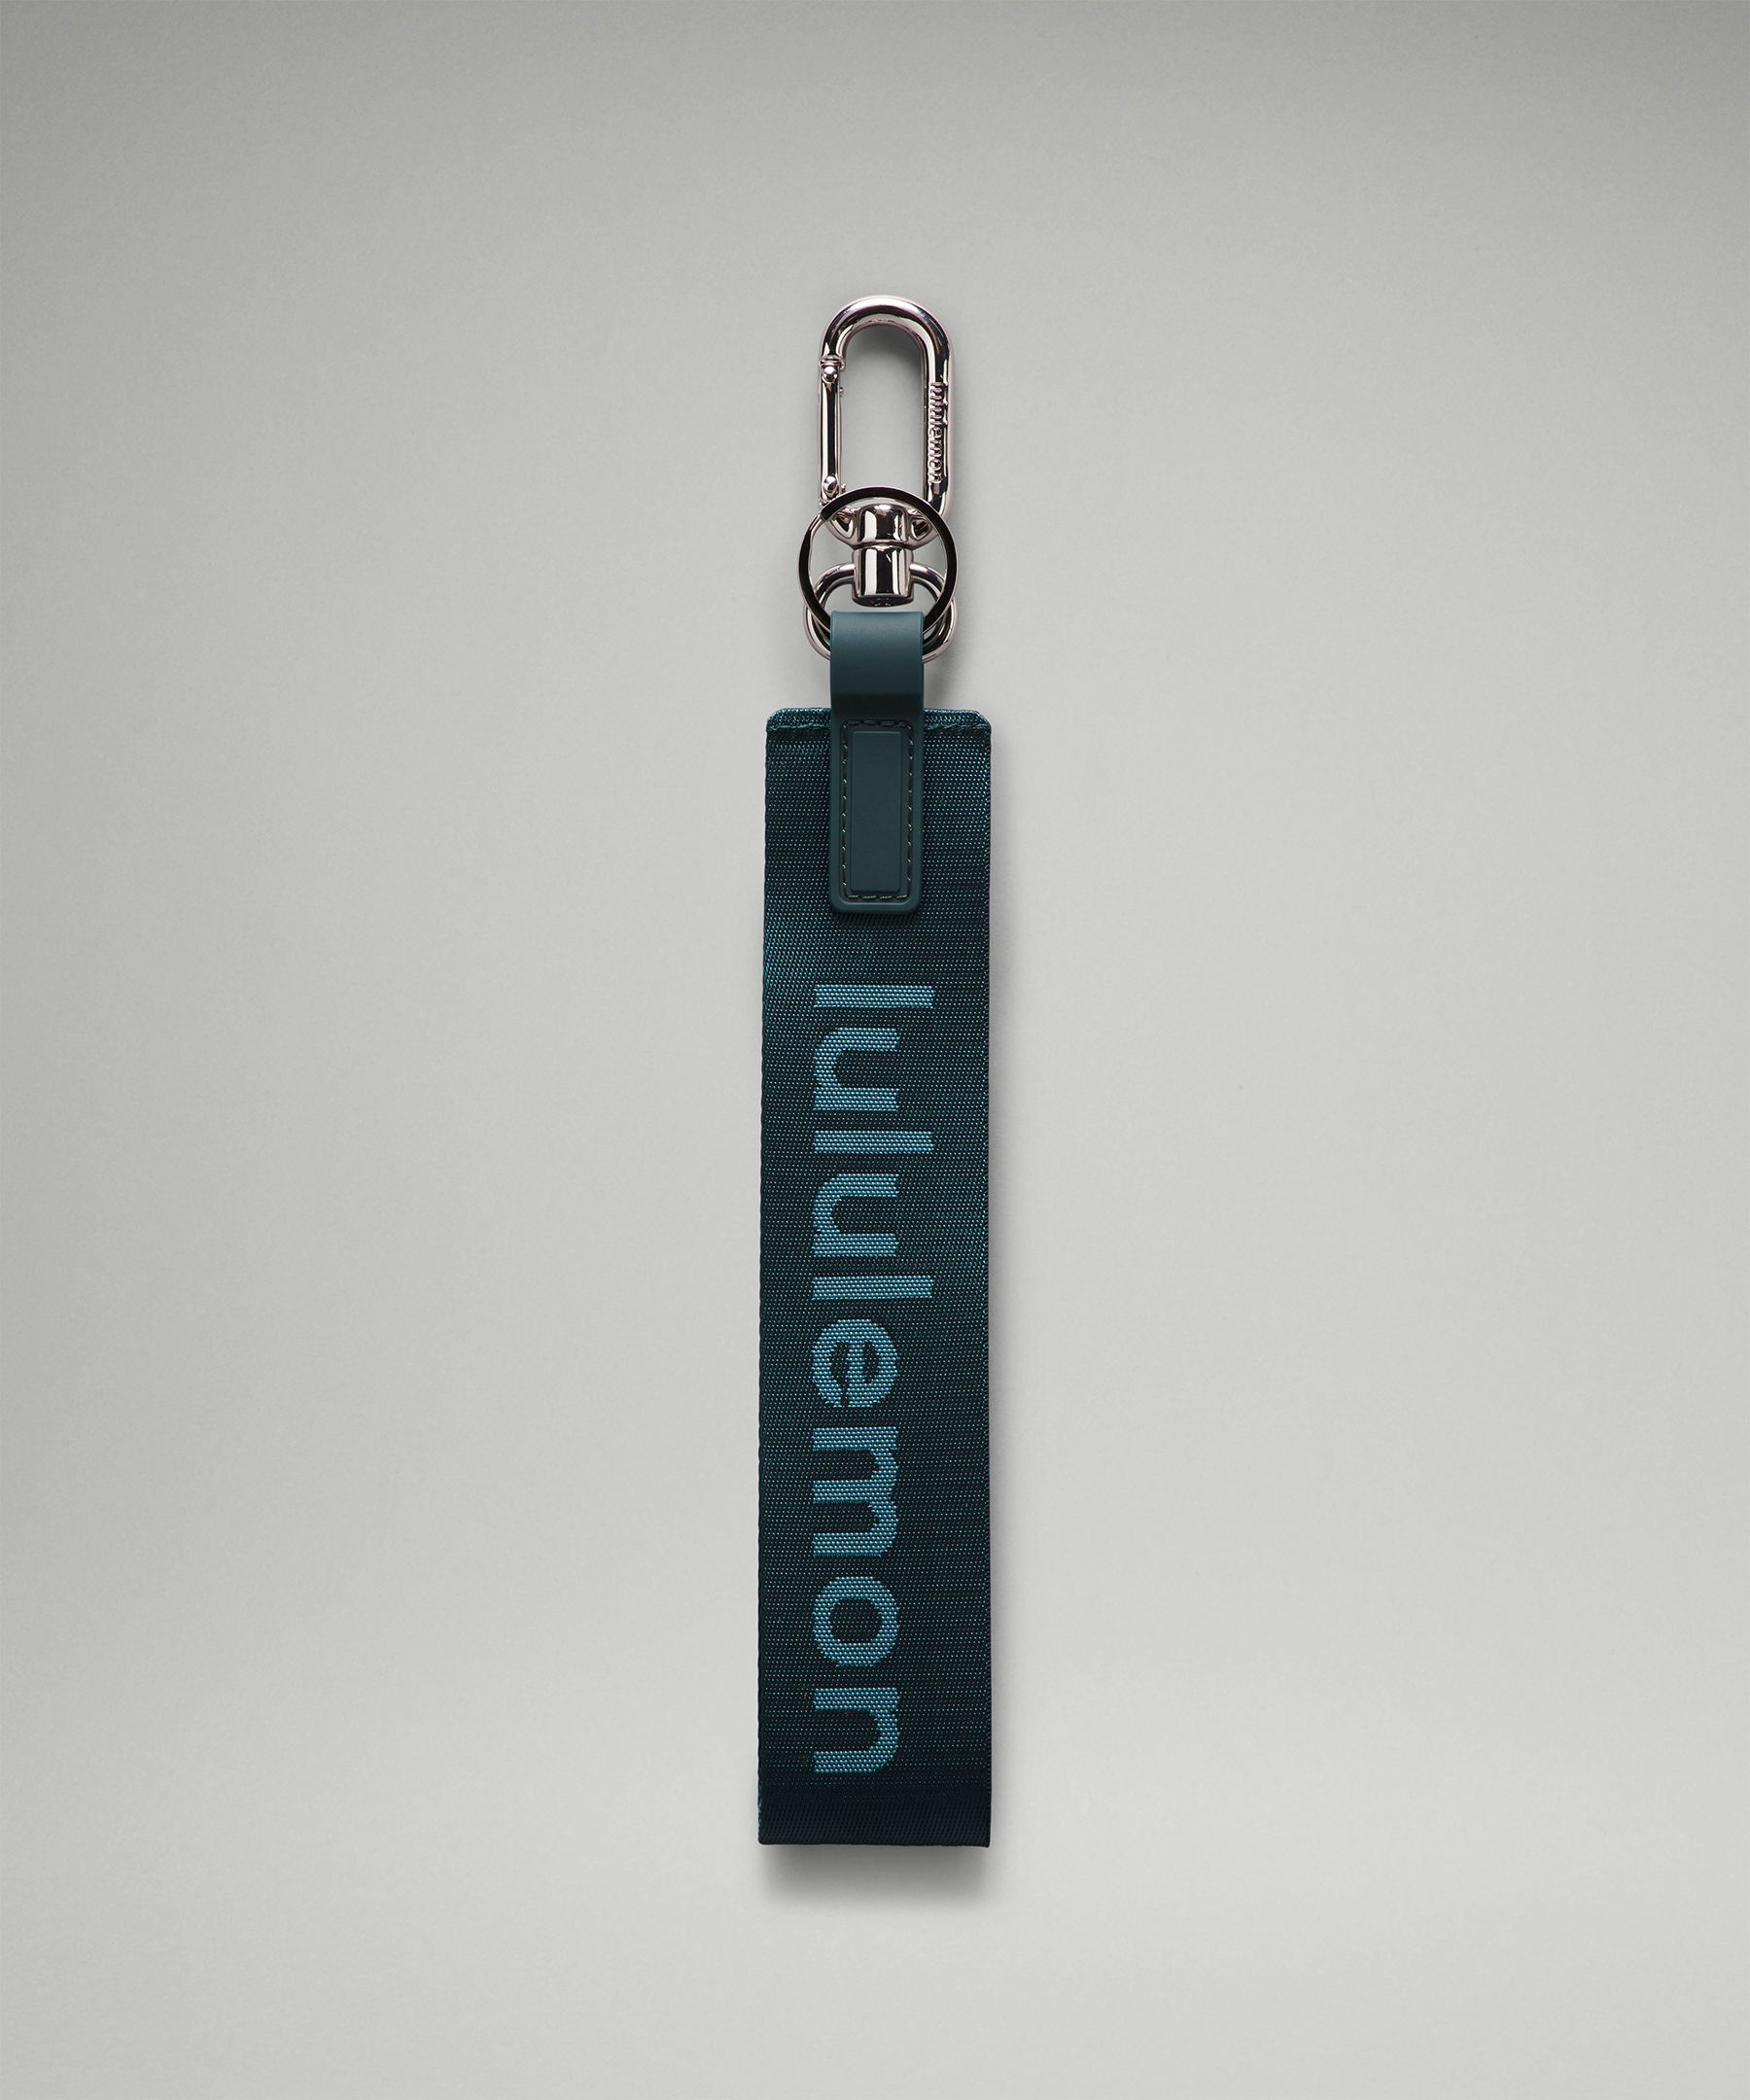 INBLUE Custom Keychain for Men with Name, Cute Keychains for Women